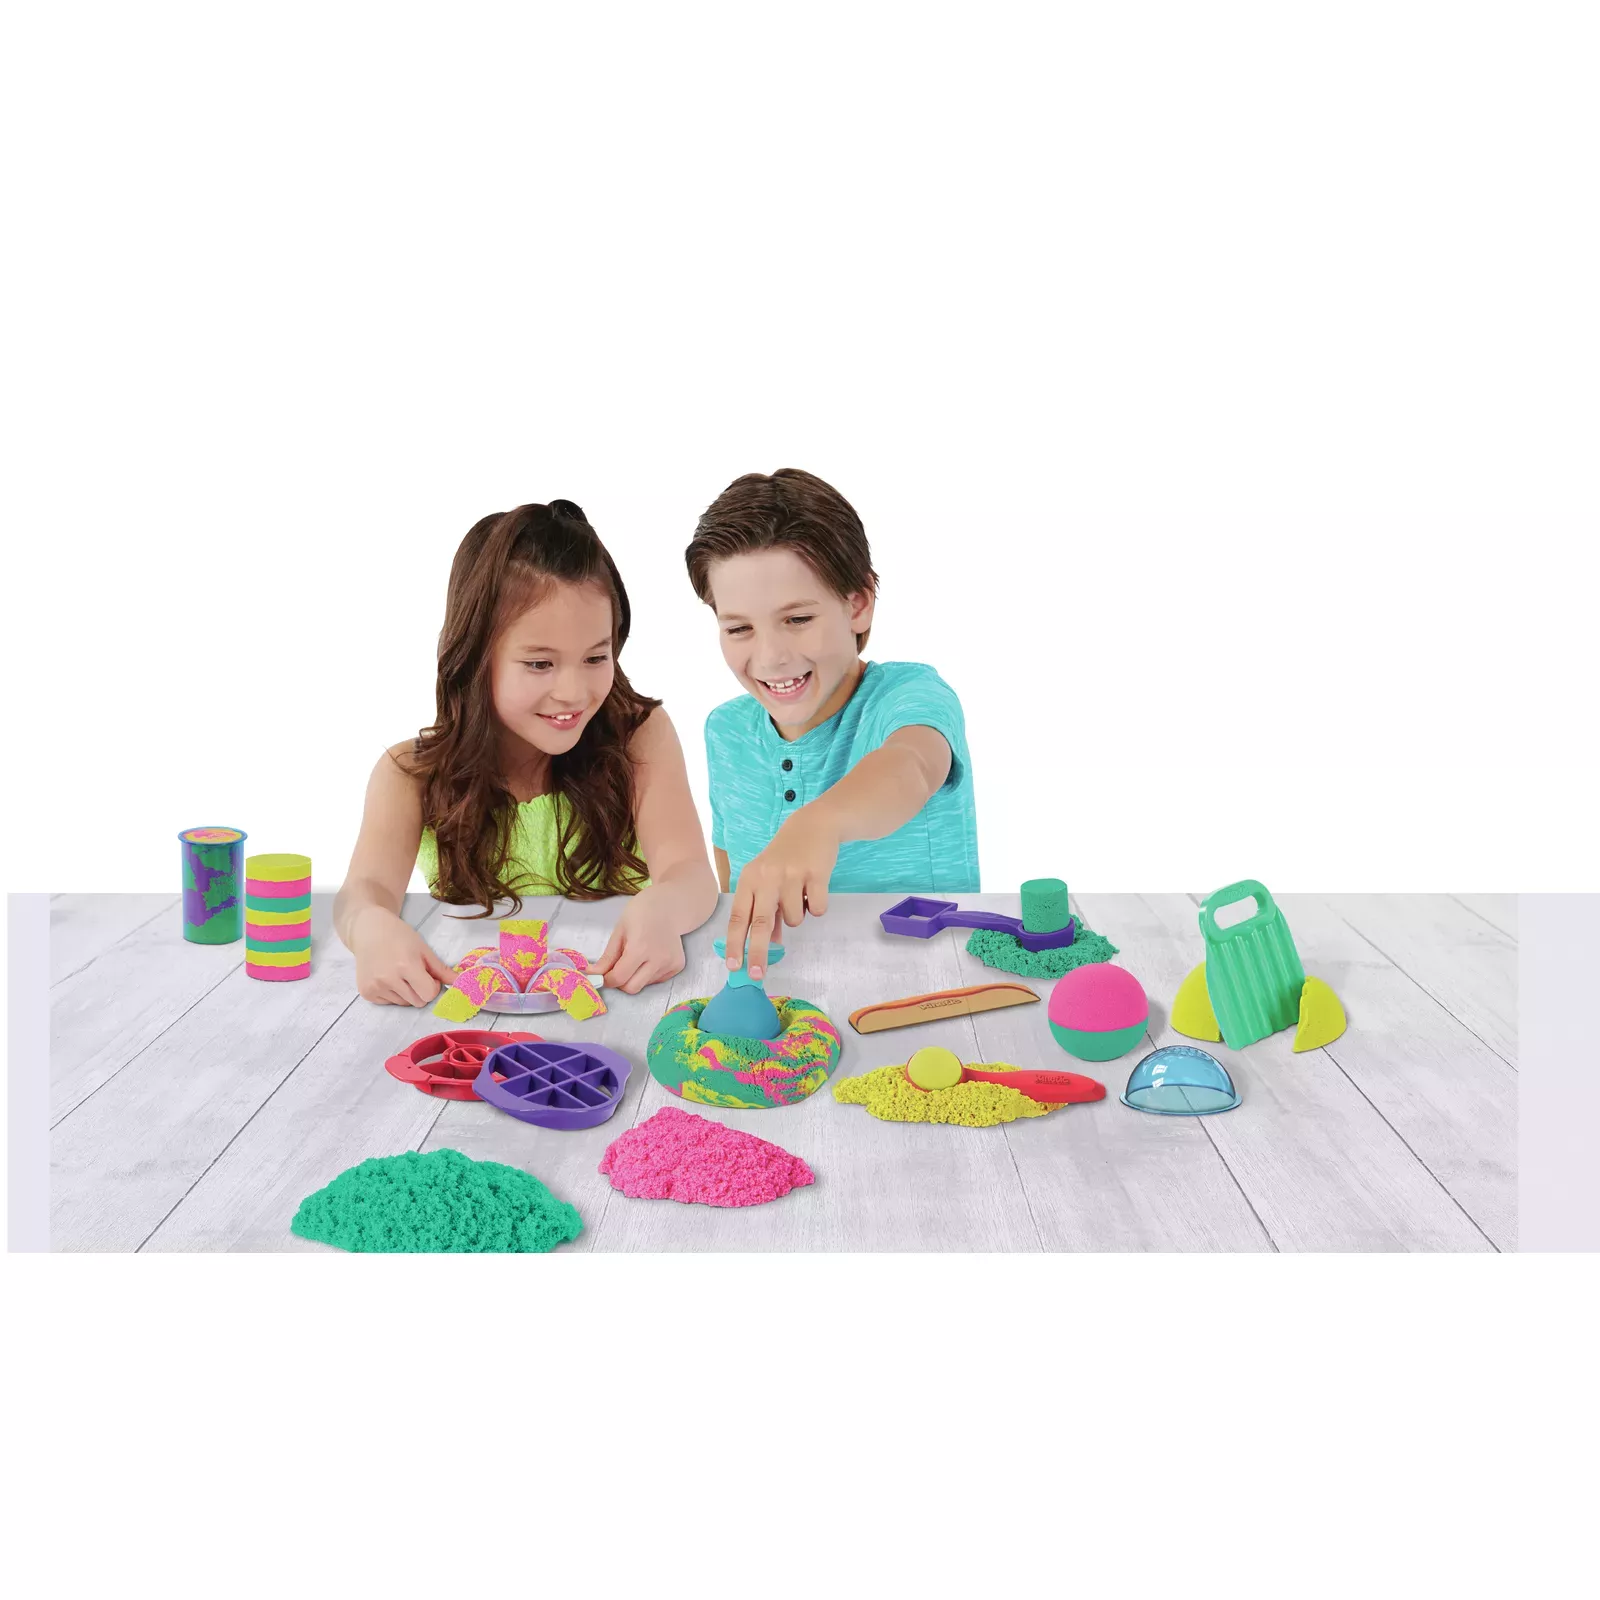 Kinetic Sand Ultimate Sandisfying Set with 10 Molds & Tools 